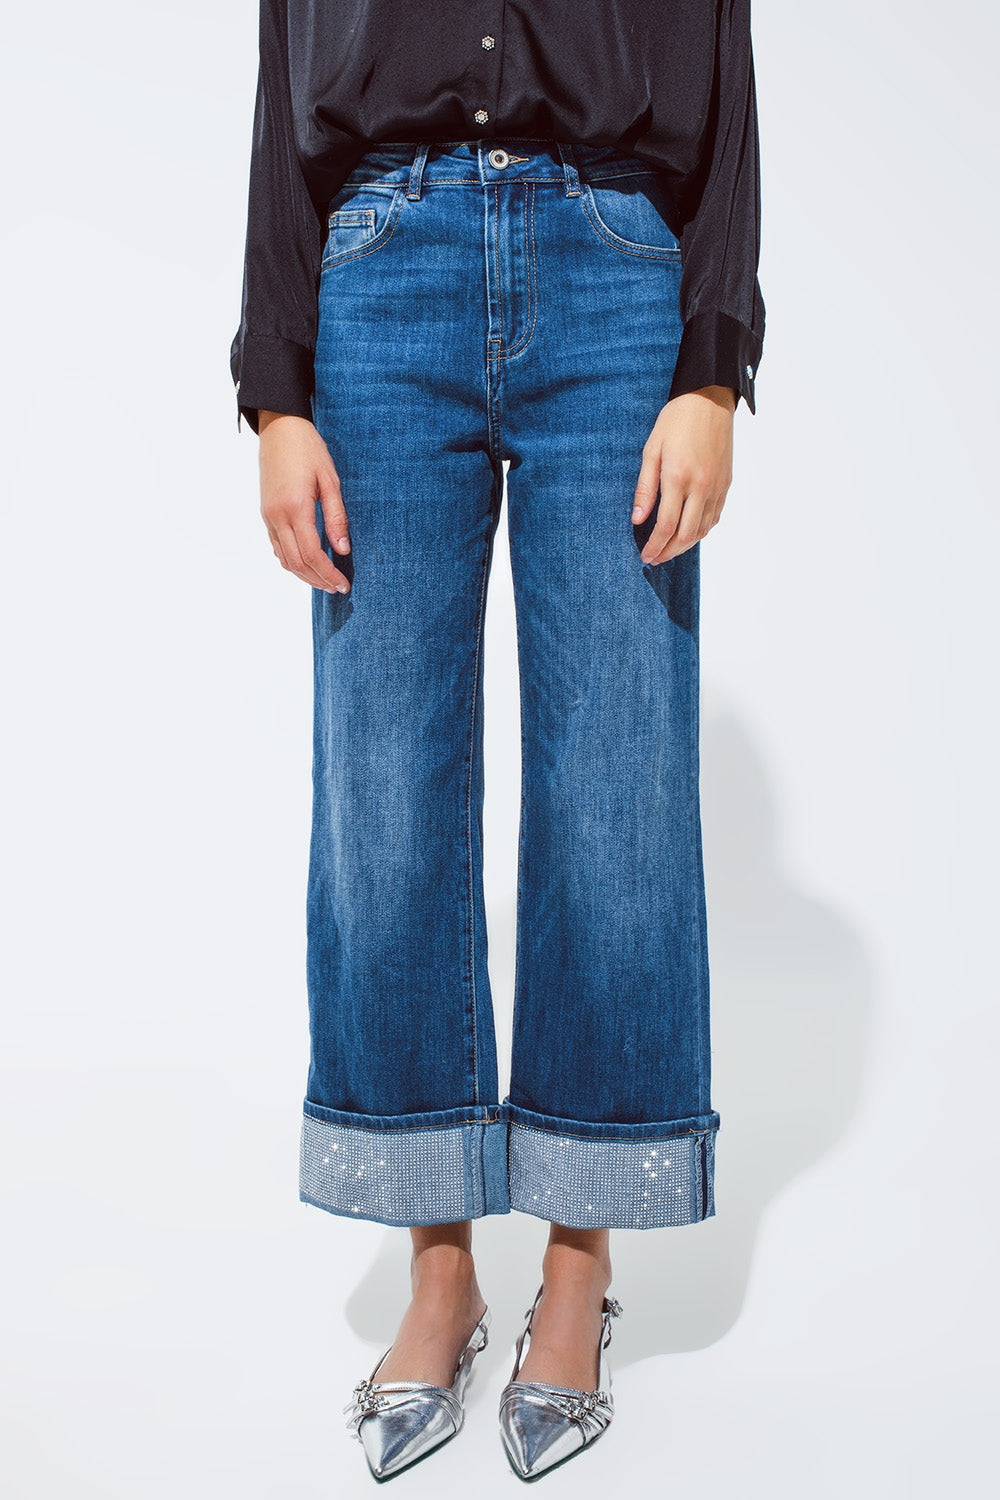 Q2 Straight Leg Jeans With Folded Hem With Sequins Detail in Mid Wash